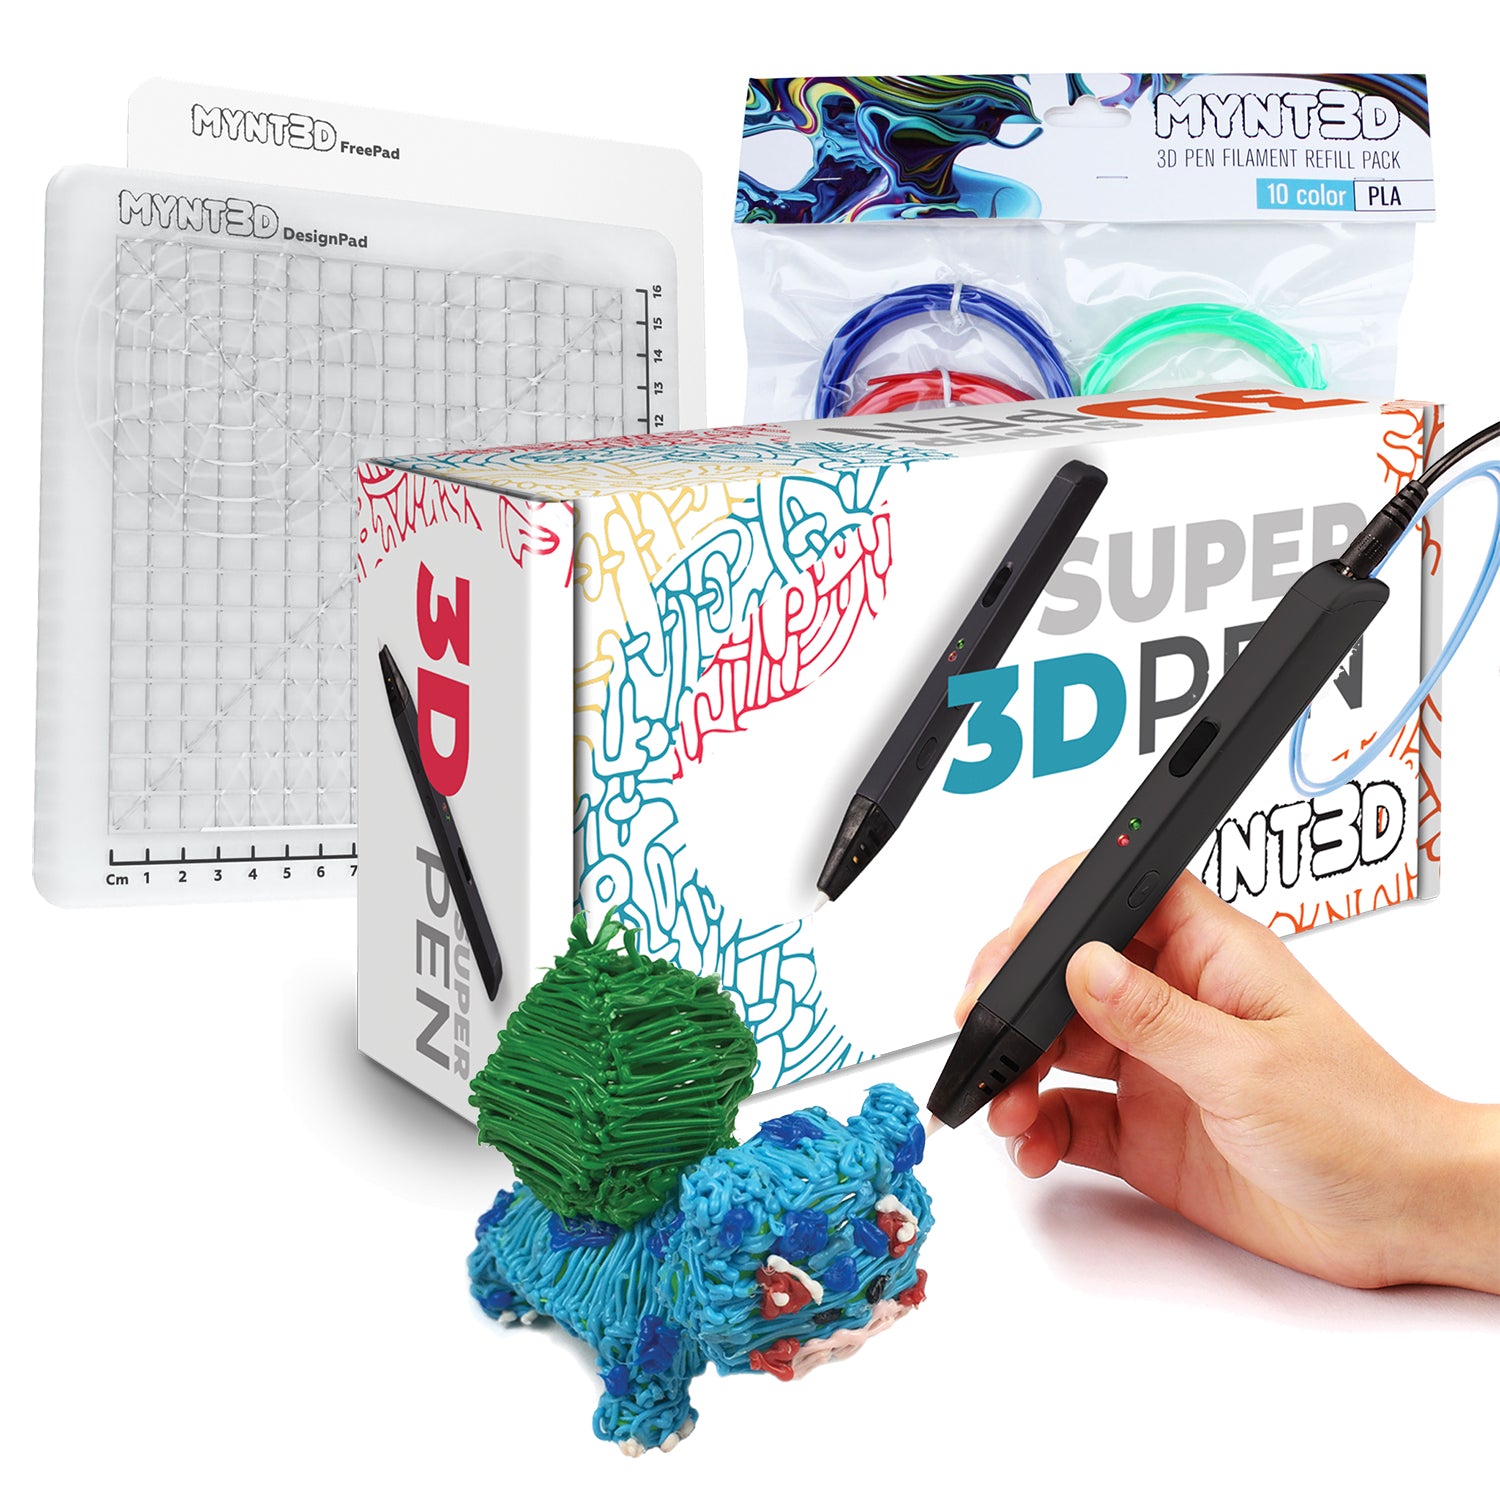 Accessories for 3D pens